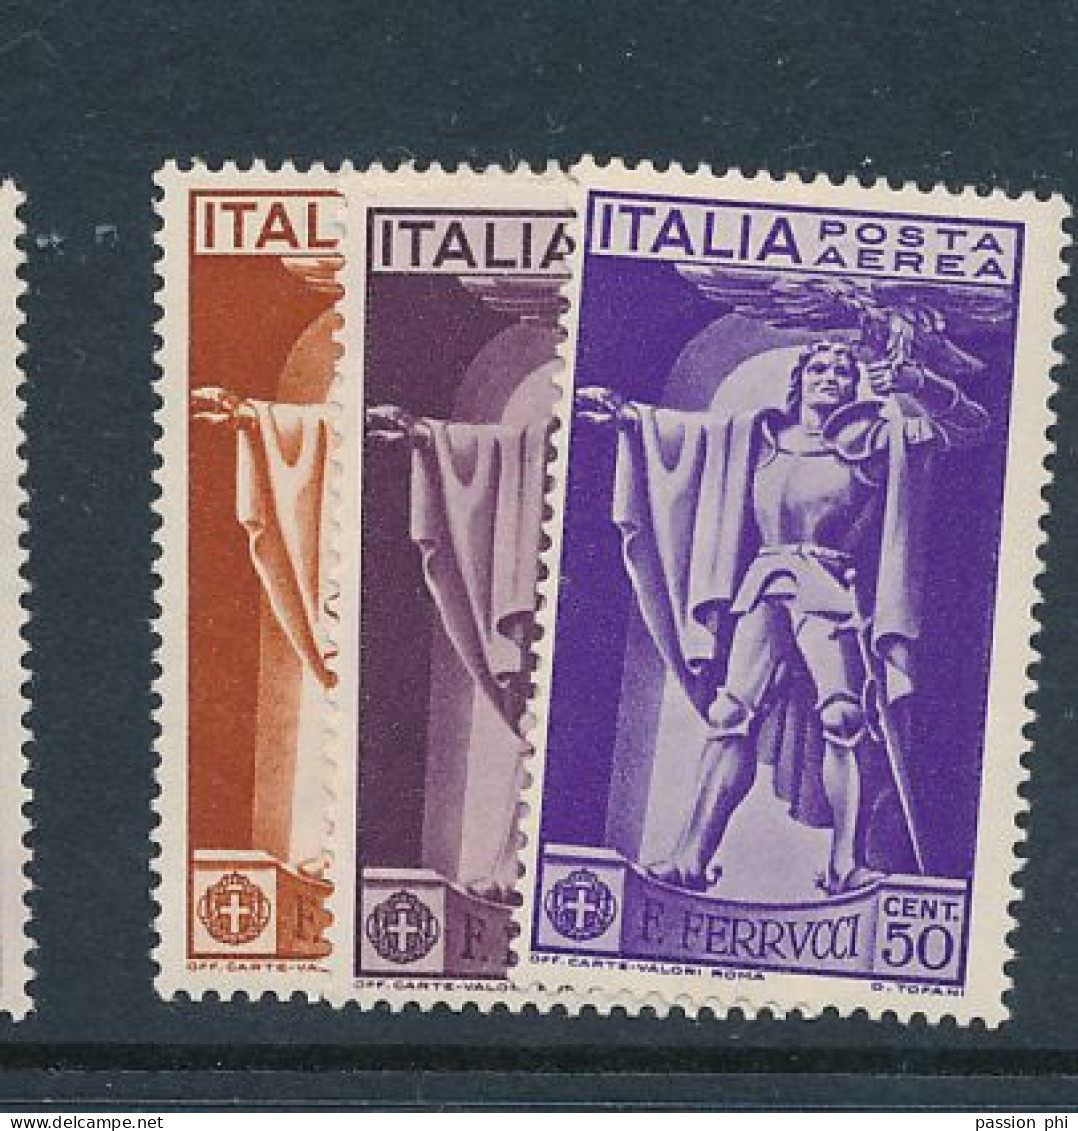 ITALY SASSONE A18/20 MNH STAIN ON THE GUM NO RUST BUT BAD STOCKAGE - Posta Aerea